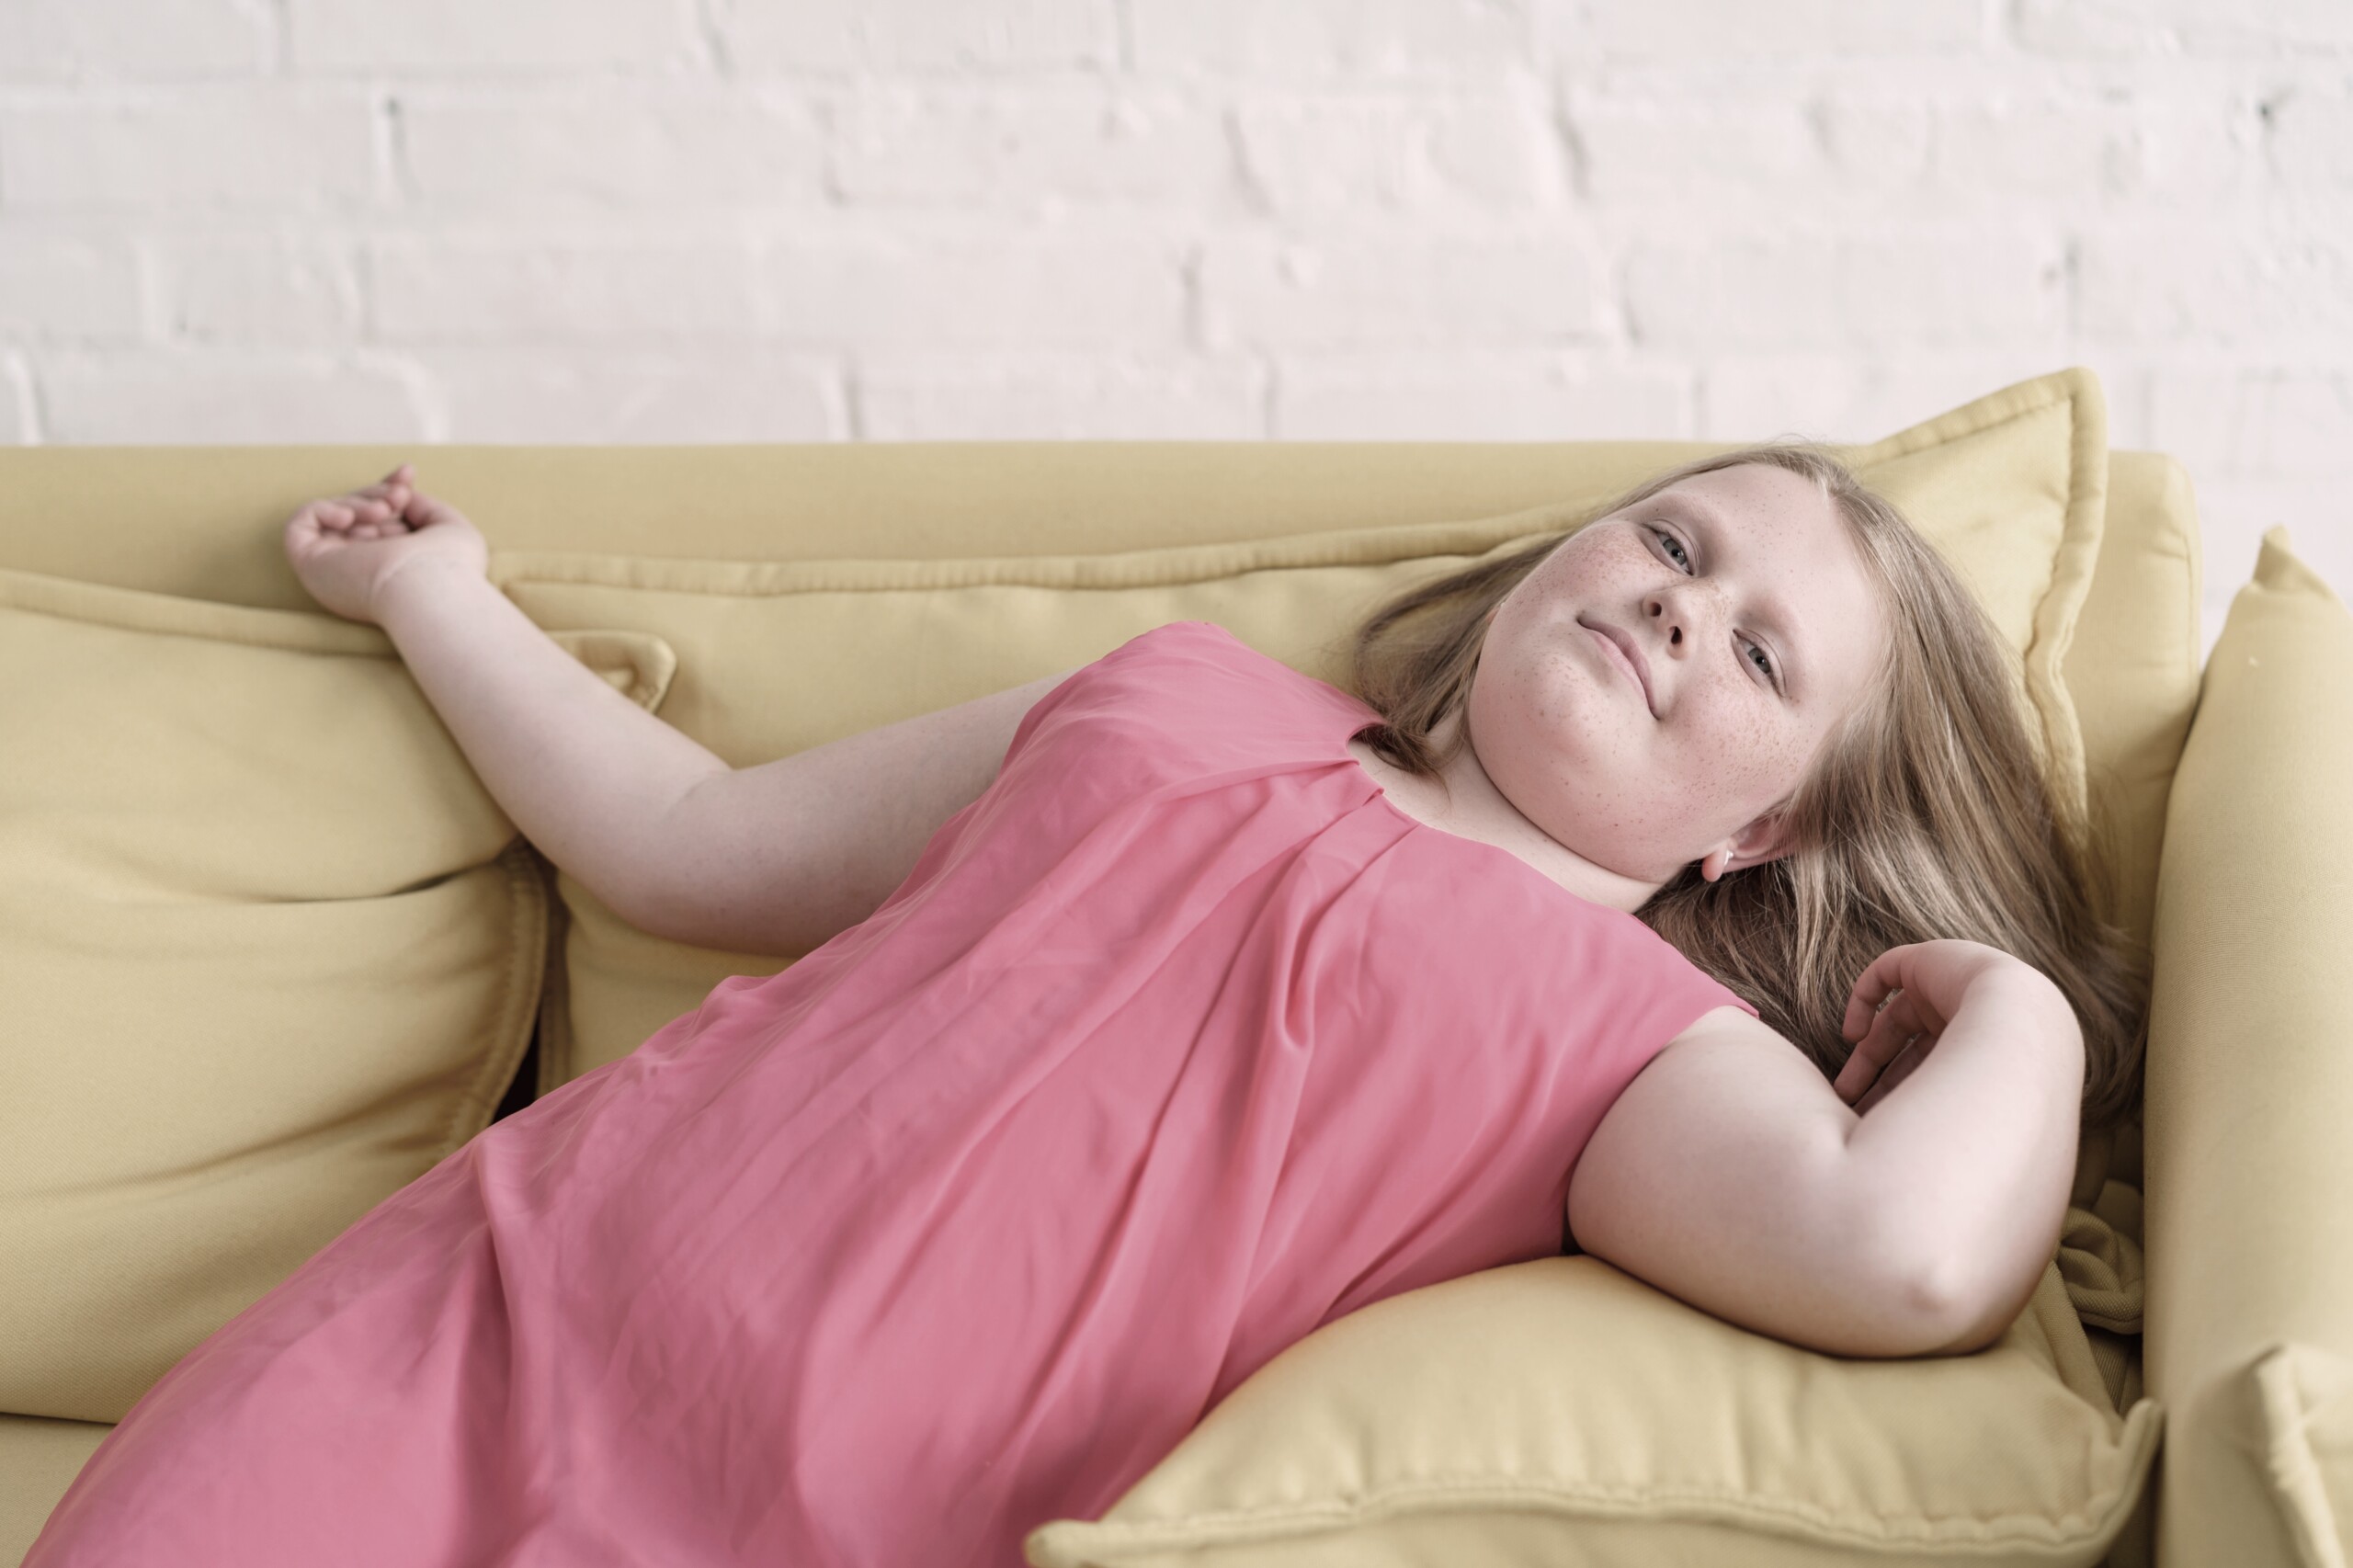 Are Obese Children at Higher Risk of Pulmonary Embolism?